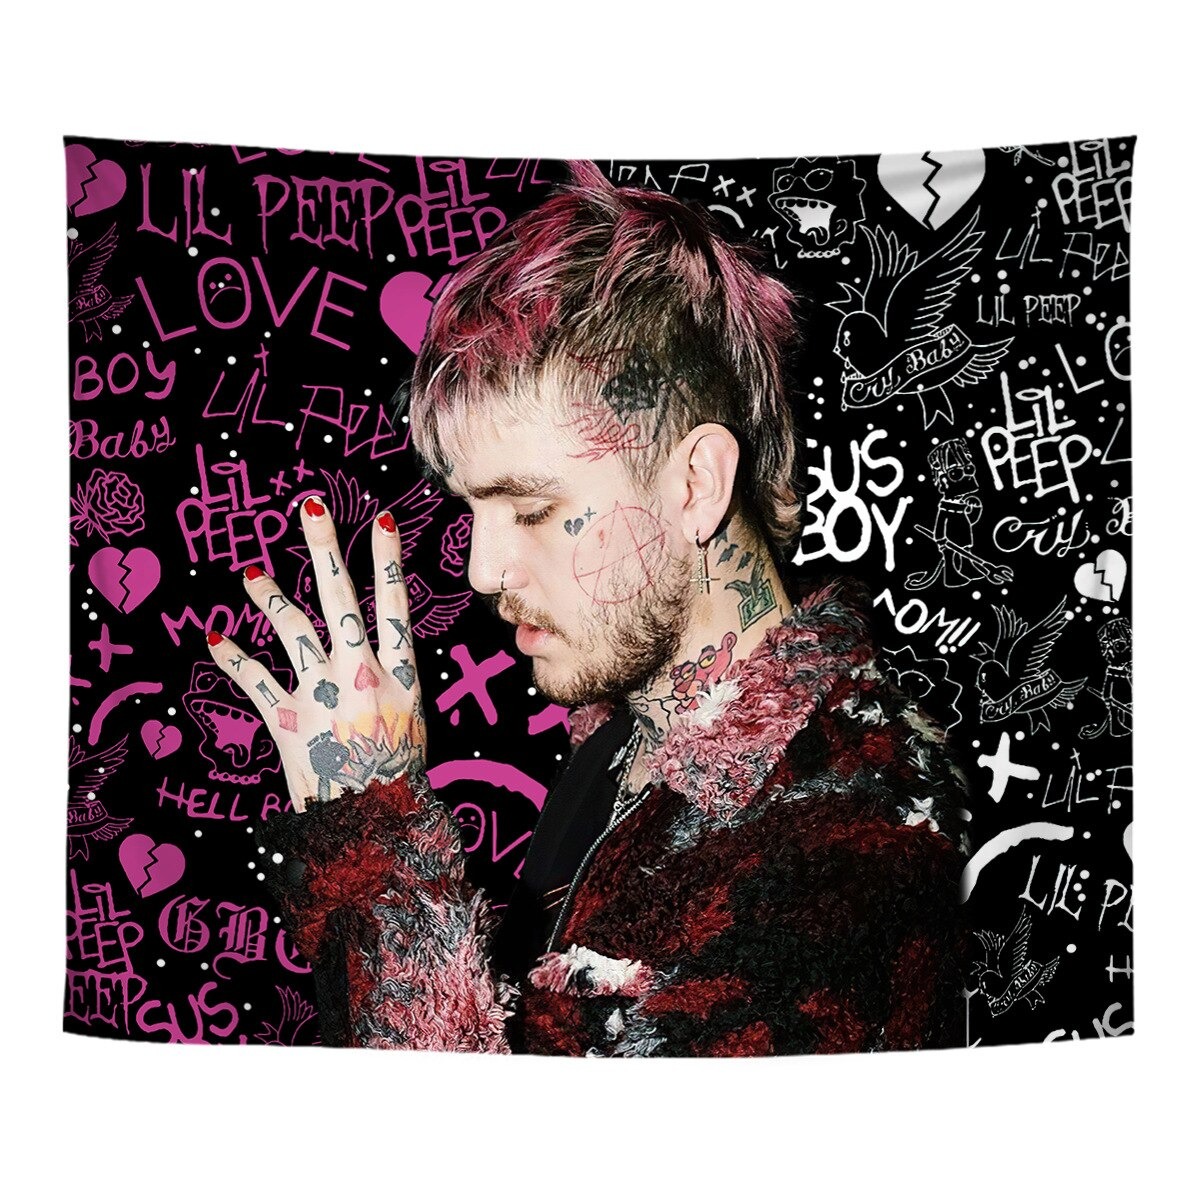 lil peep tapestry wall hanging 3786 - Lil Peep Store